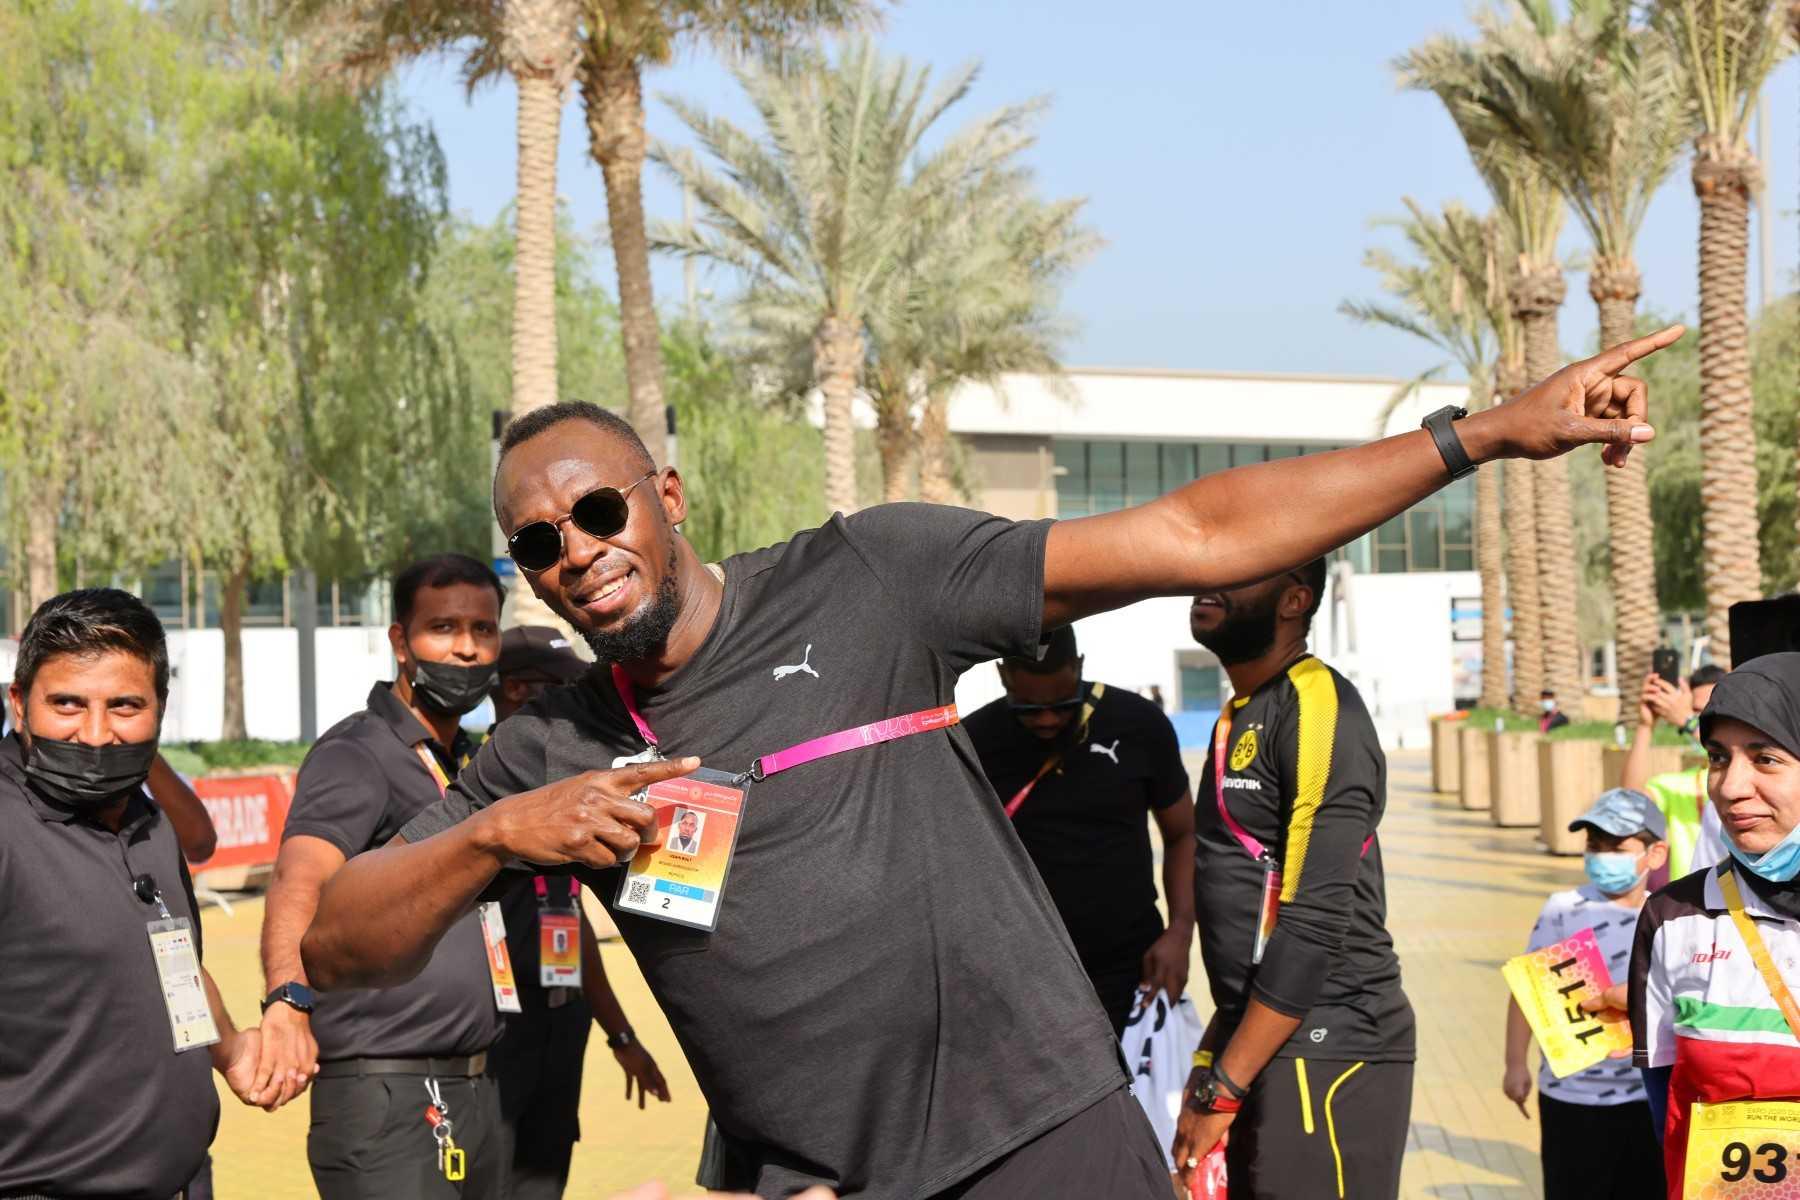 Jamaican sprinter Usain Bolt arrives for a charity run at the Expo 2020, in the Gulf emirate of Dubai, on Nov 13, 2021. Photo: AFP